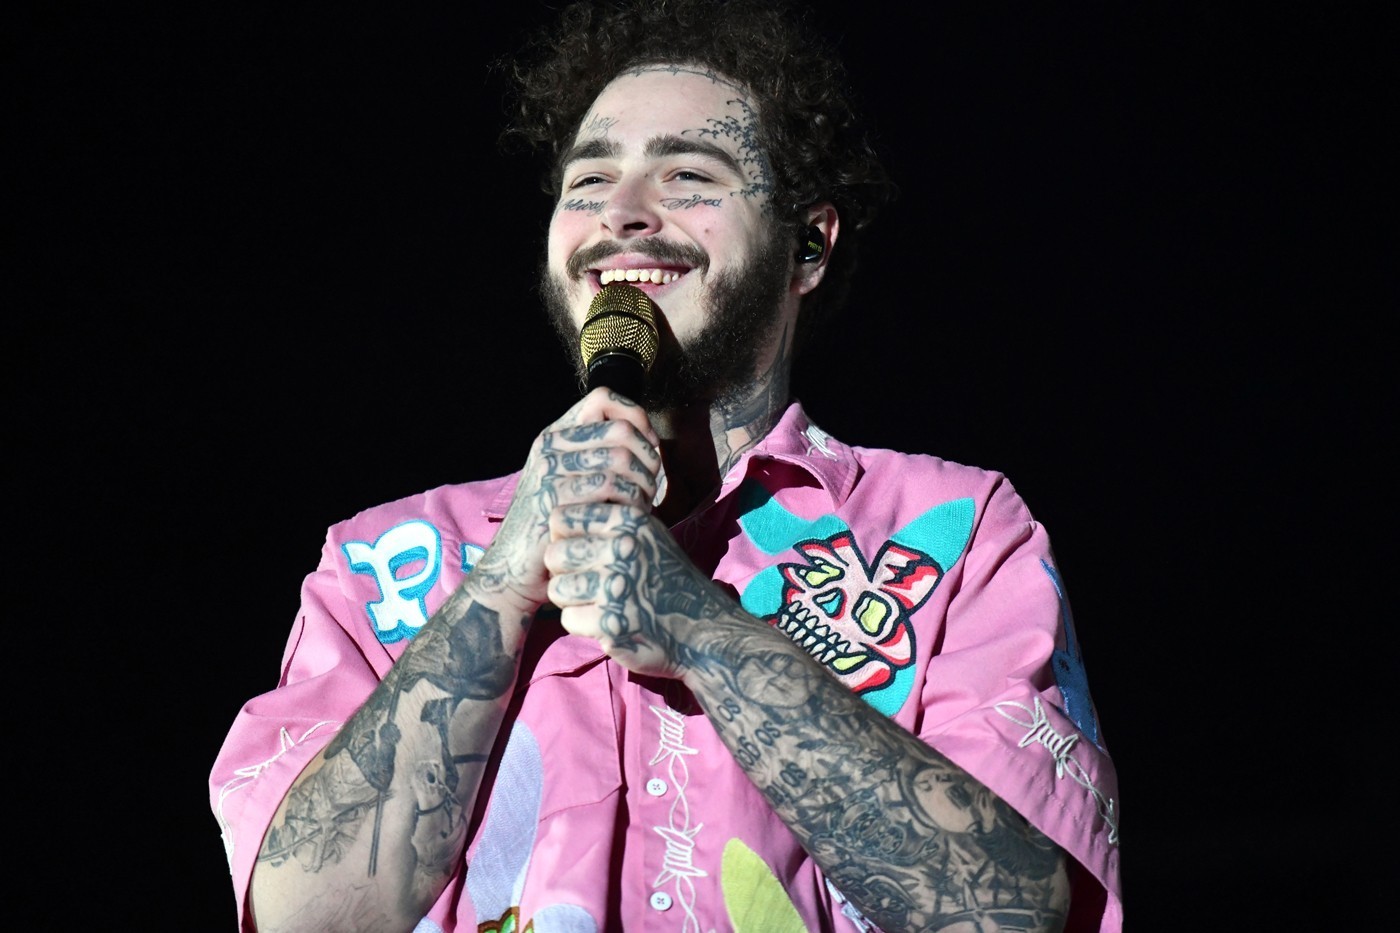 Post Malone Debuts Massive New Face Tattoo Ahead of New Year Eve Performance